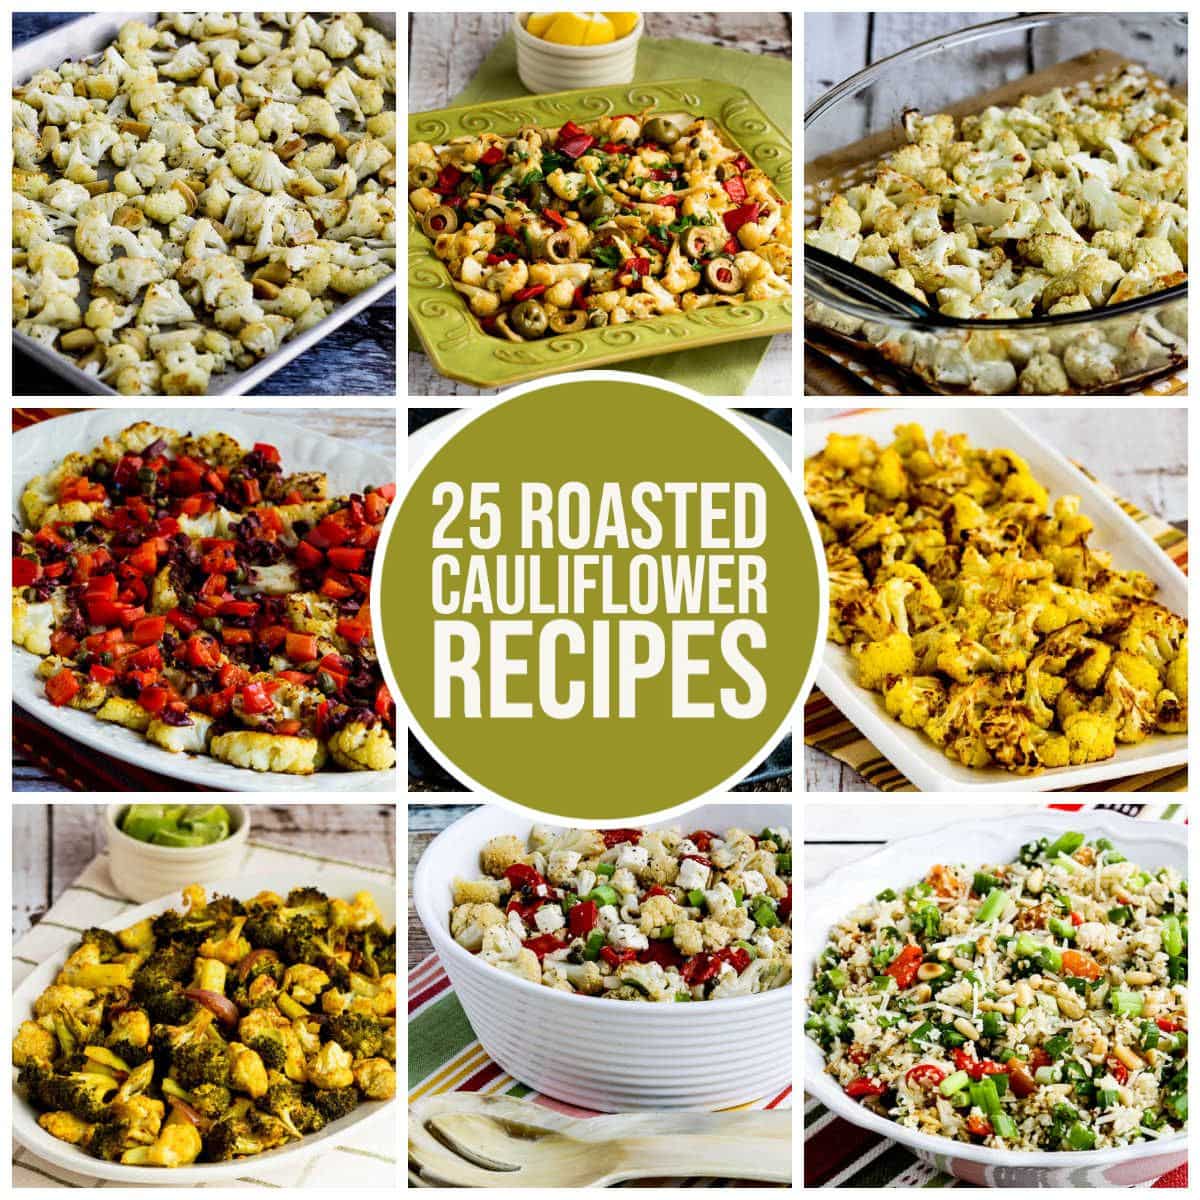 25 Roasted Cauliflower Recipes compiled from featured recipes with text overlay